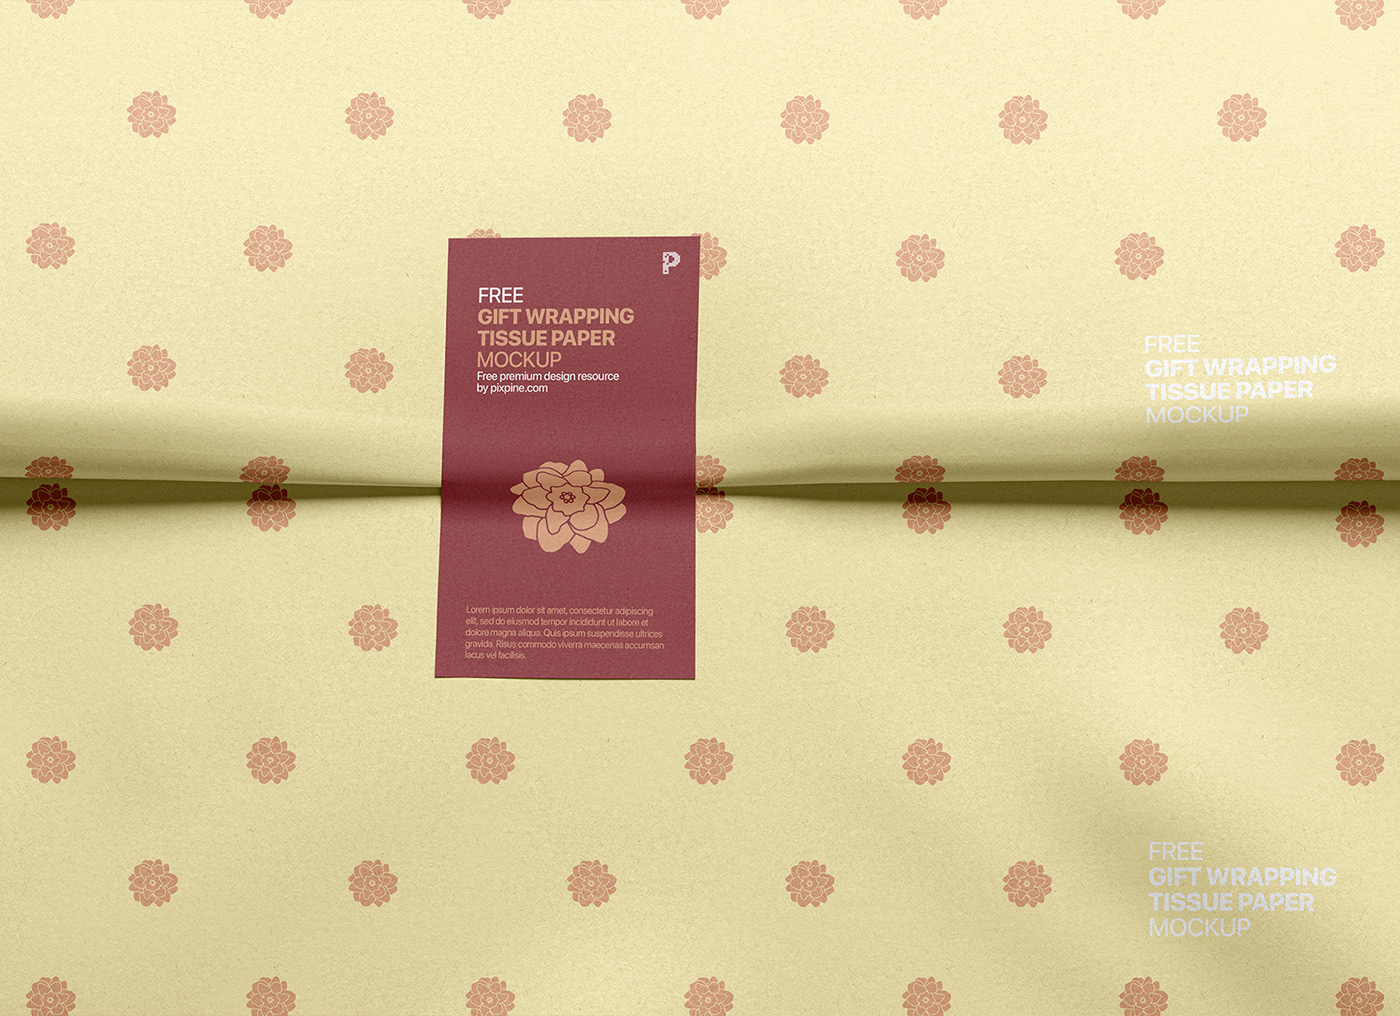 branding  design etsy free gift wrapping sheet Mockup pattern design  psd template surface design wrapping tissue paper